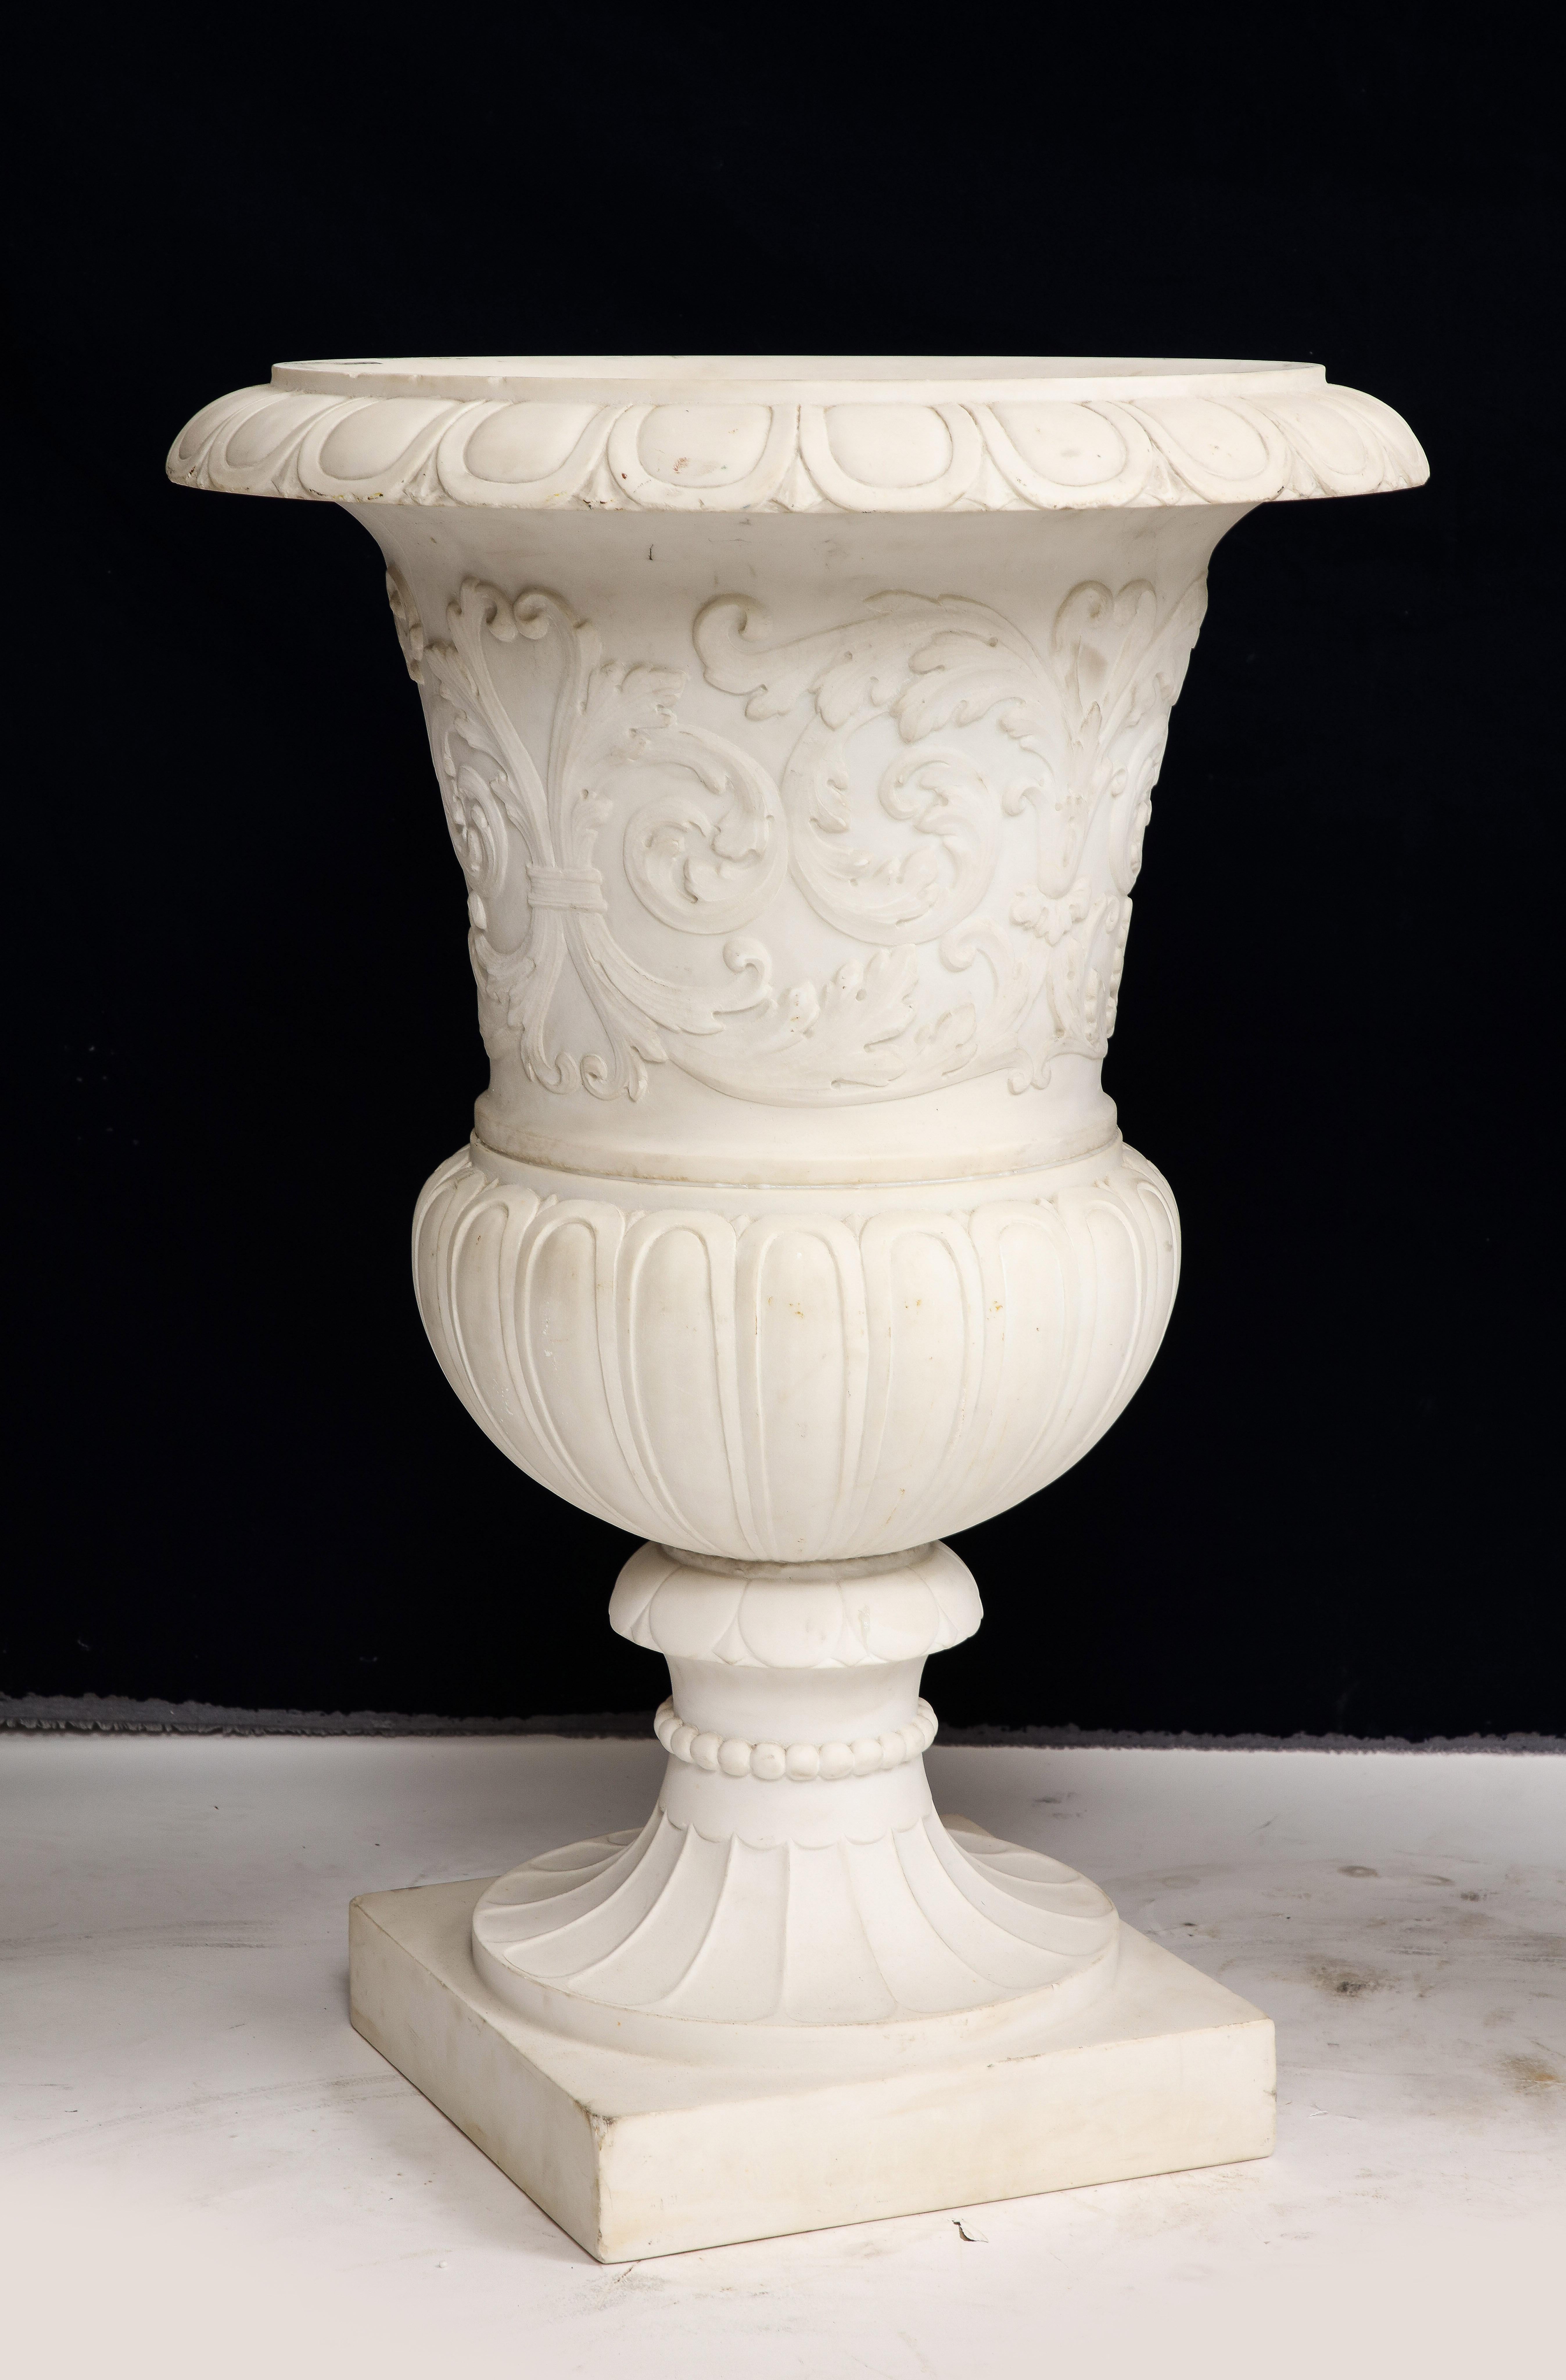 Pair of Italian Carrara Marble Medici Vases w/ Neoclassical Motifs in Relief For Sale 7